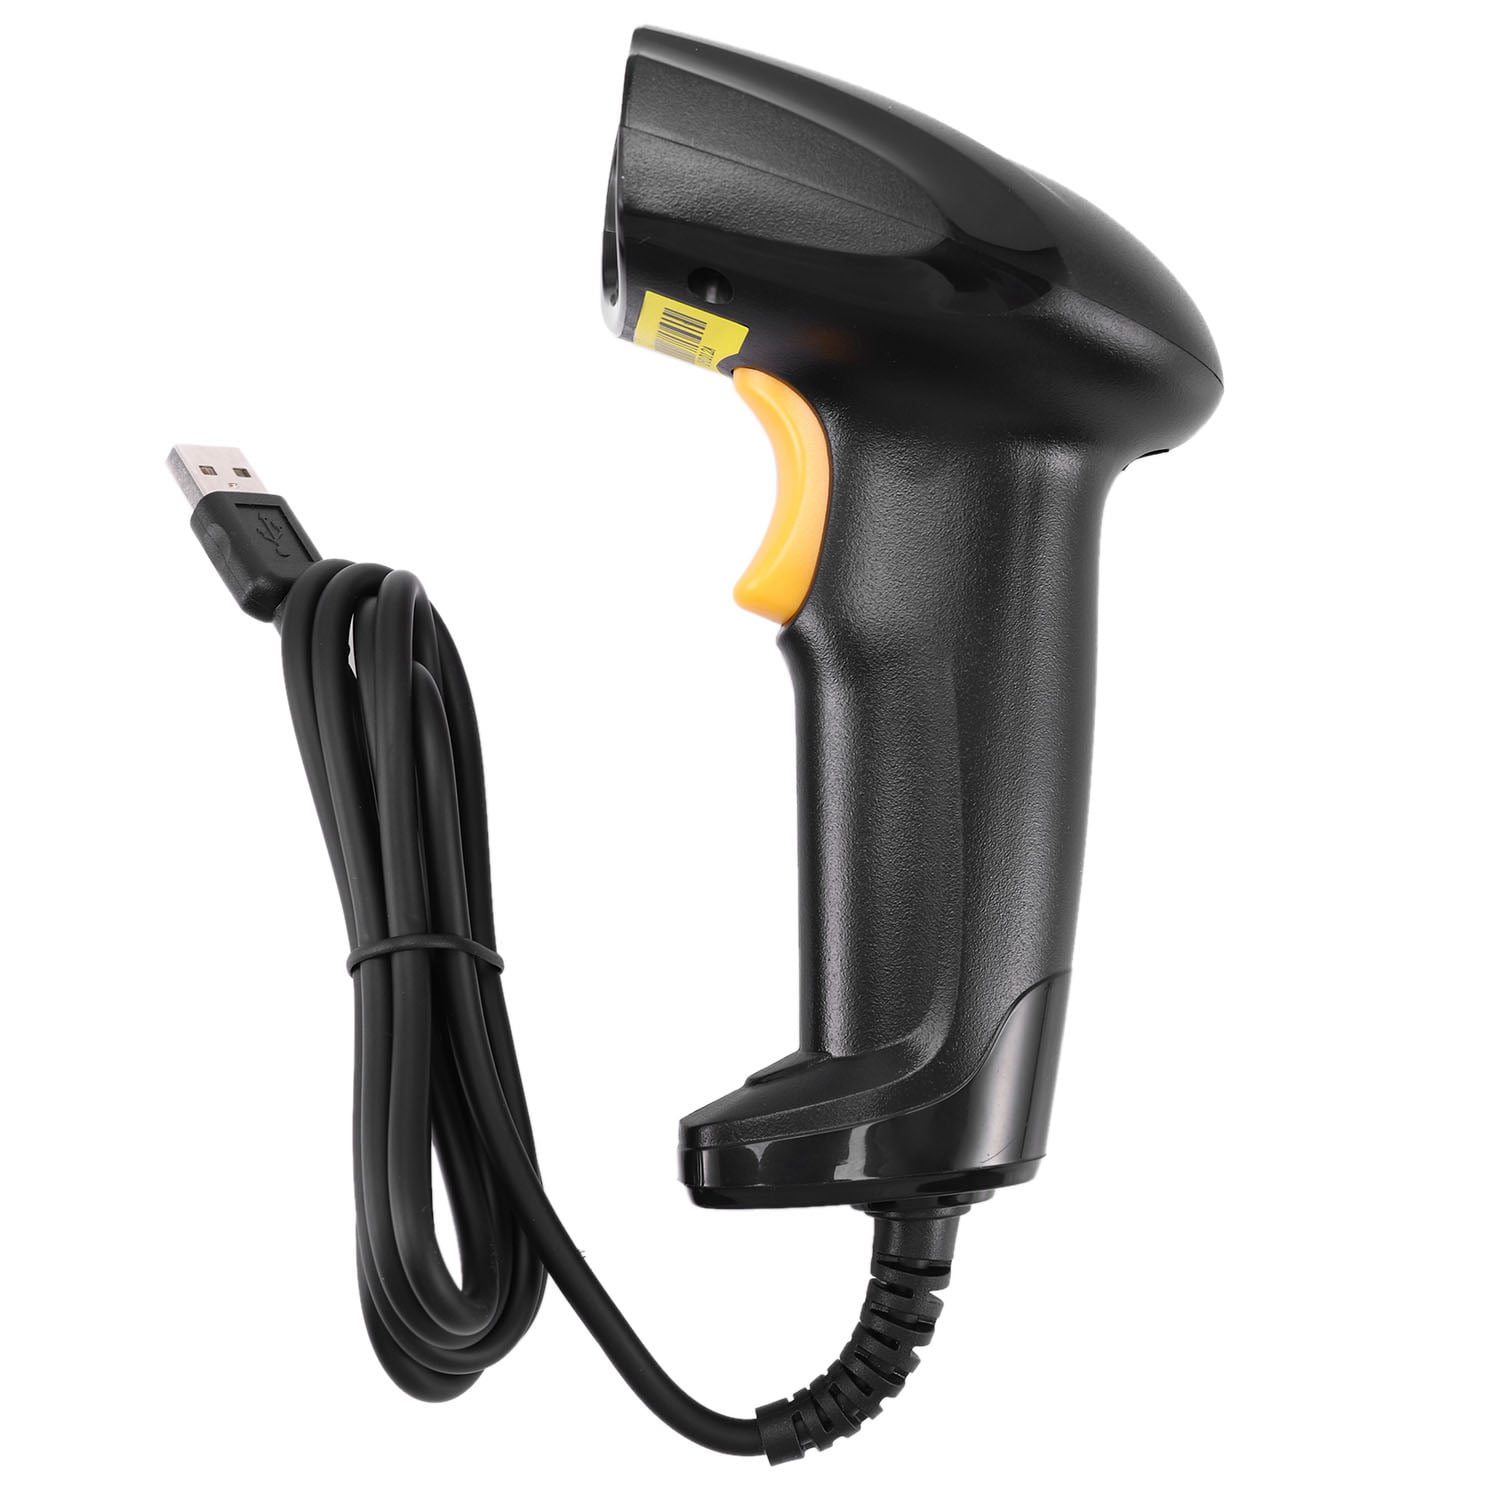 Laser Barcode Scanner USB Handheld Automatic Bar Code Reader Scan POS W/ Stand 